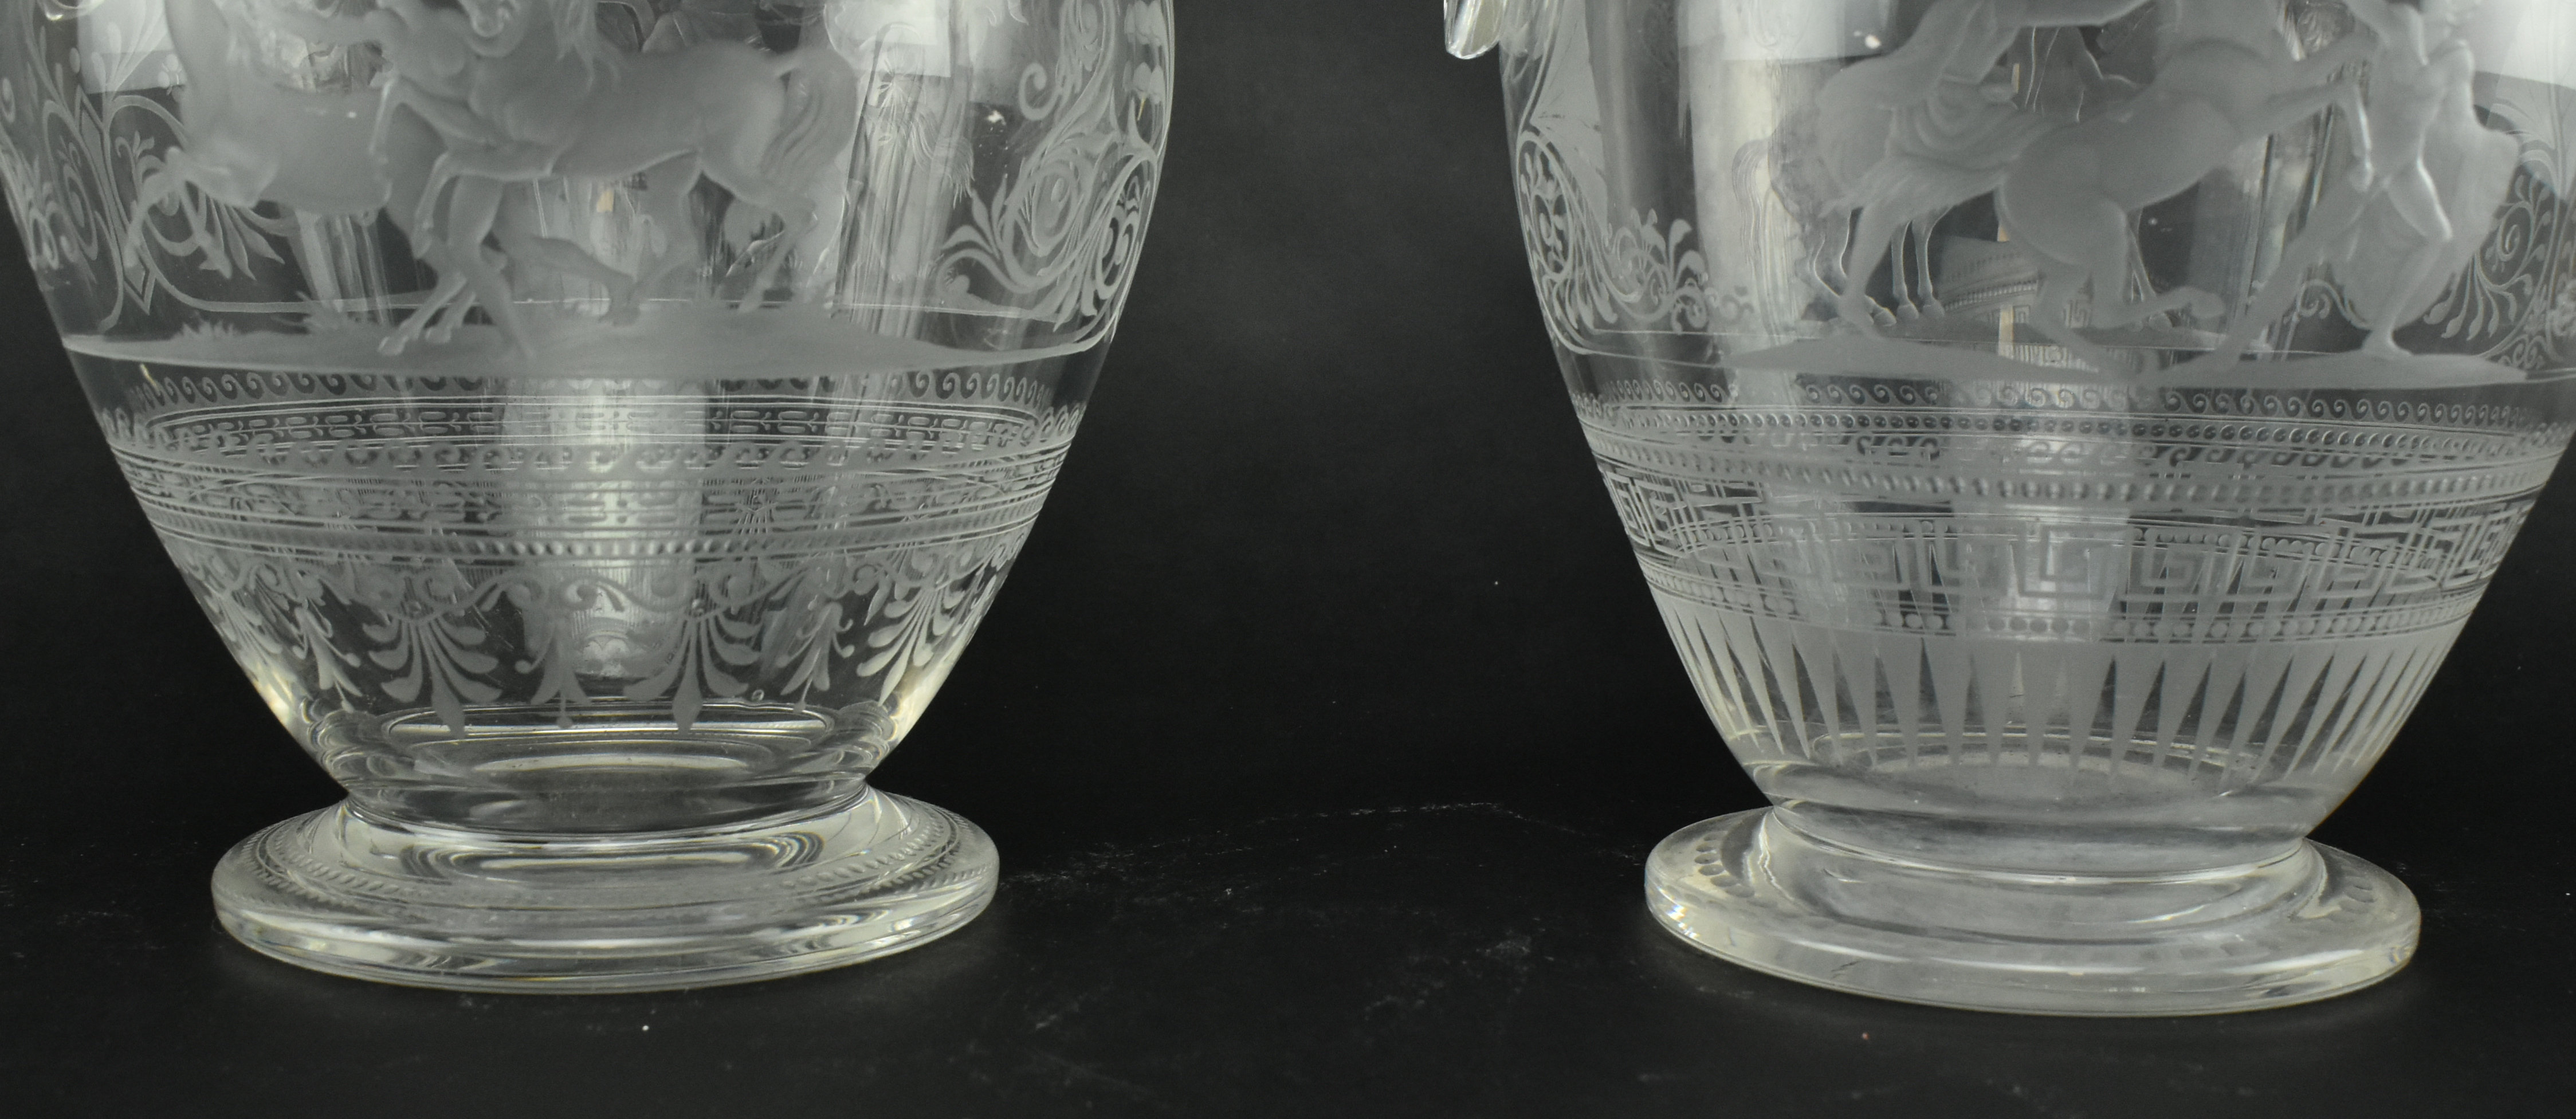 PAIR OF VICTORIAN CIRCA 1860 ENGRAVED GLASS EWERS - Image 7 of 8